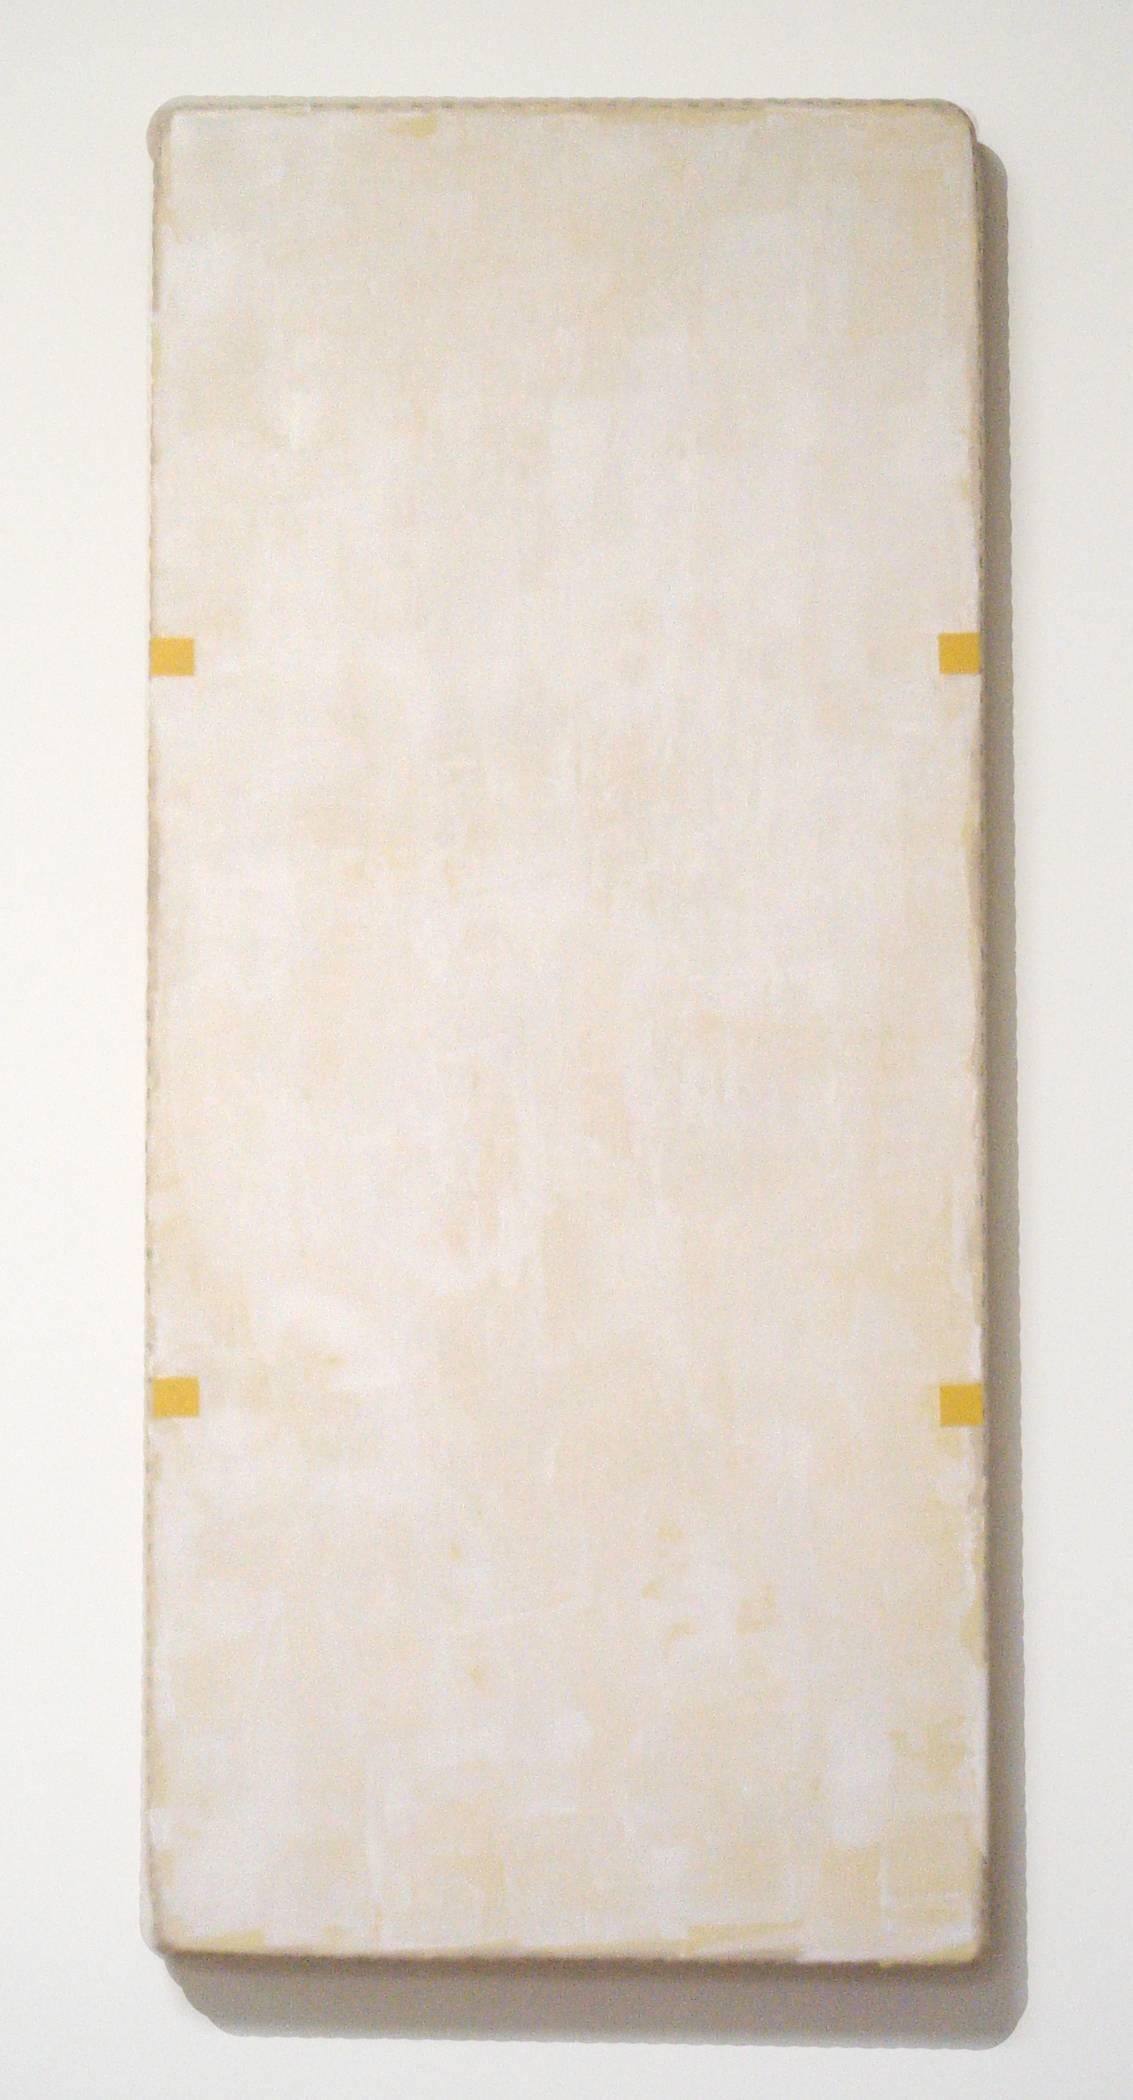 Otis Jones Abstract Painting - White Rectangle with Four Yellow Rectangles